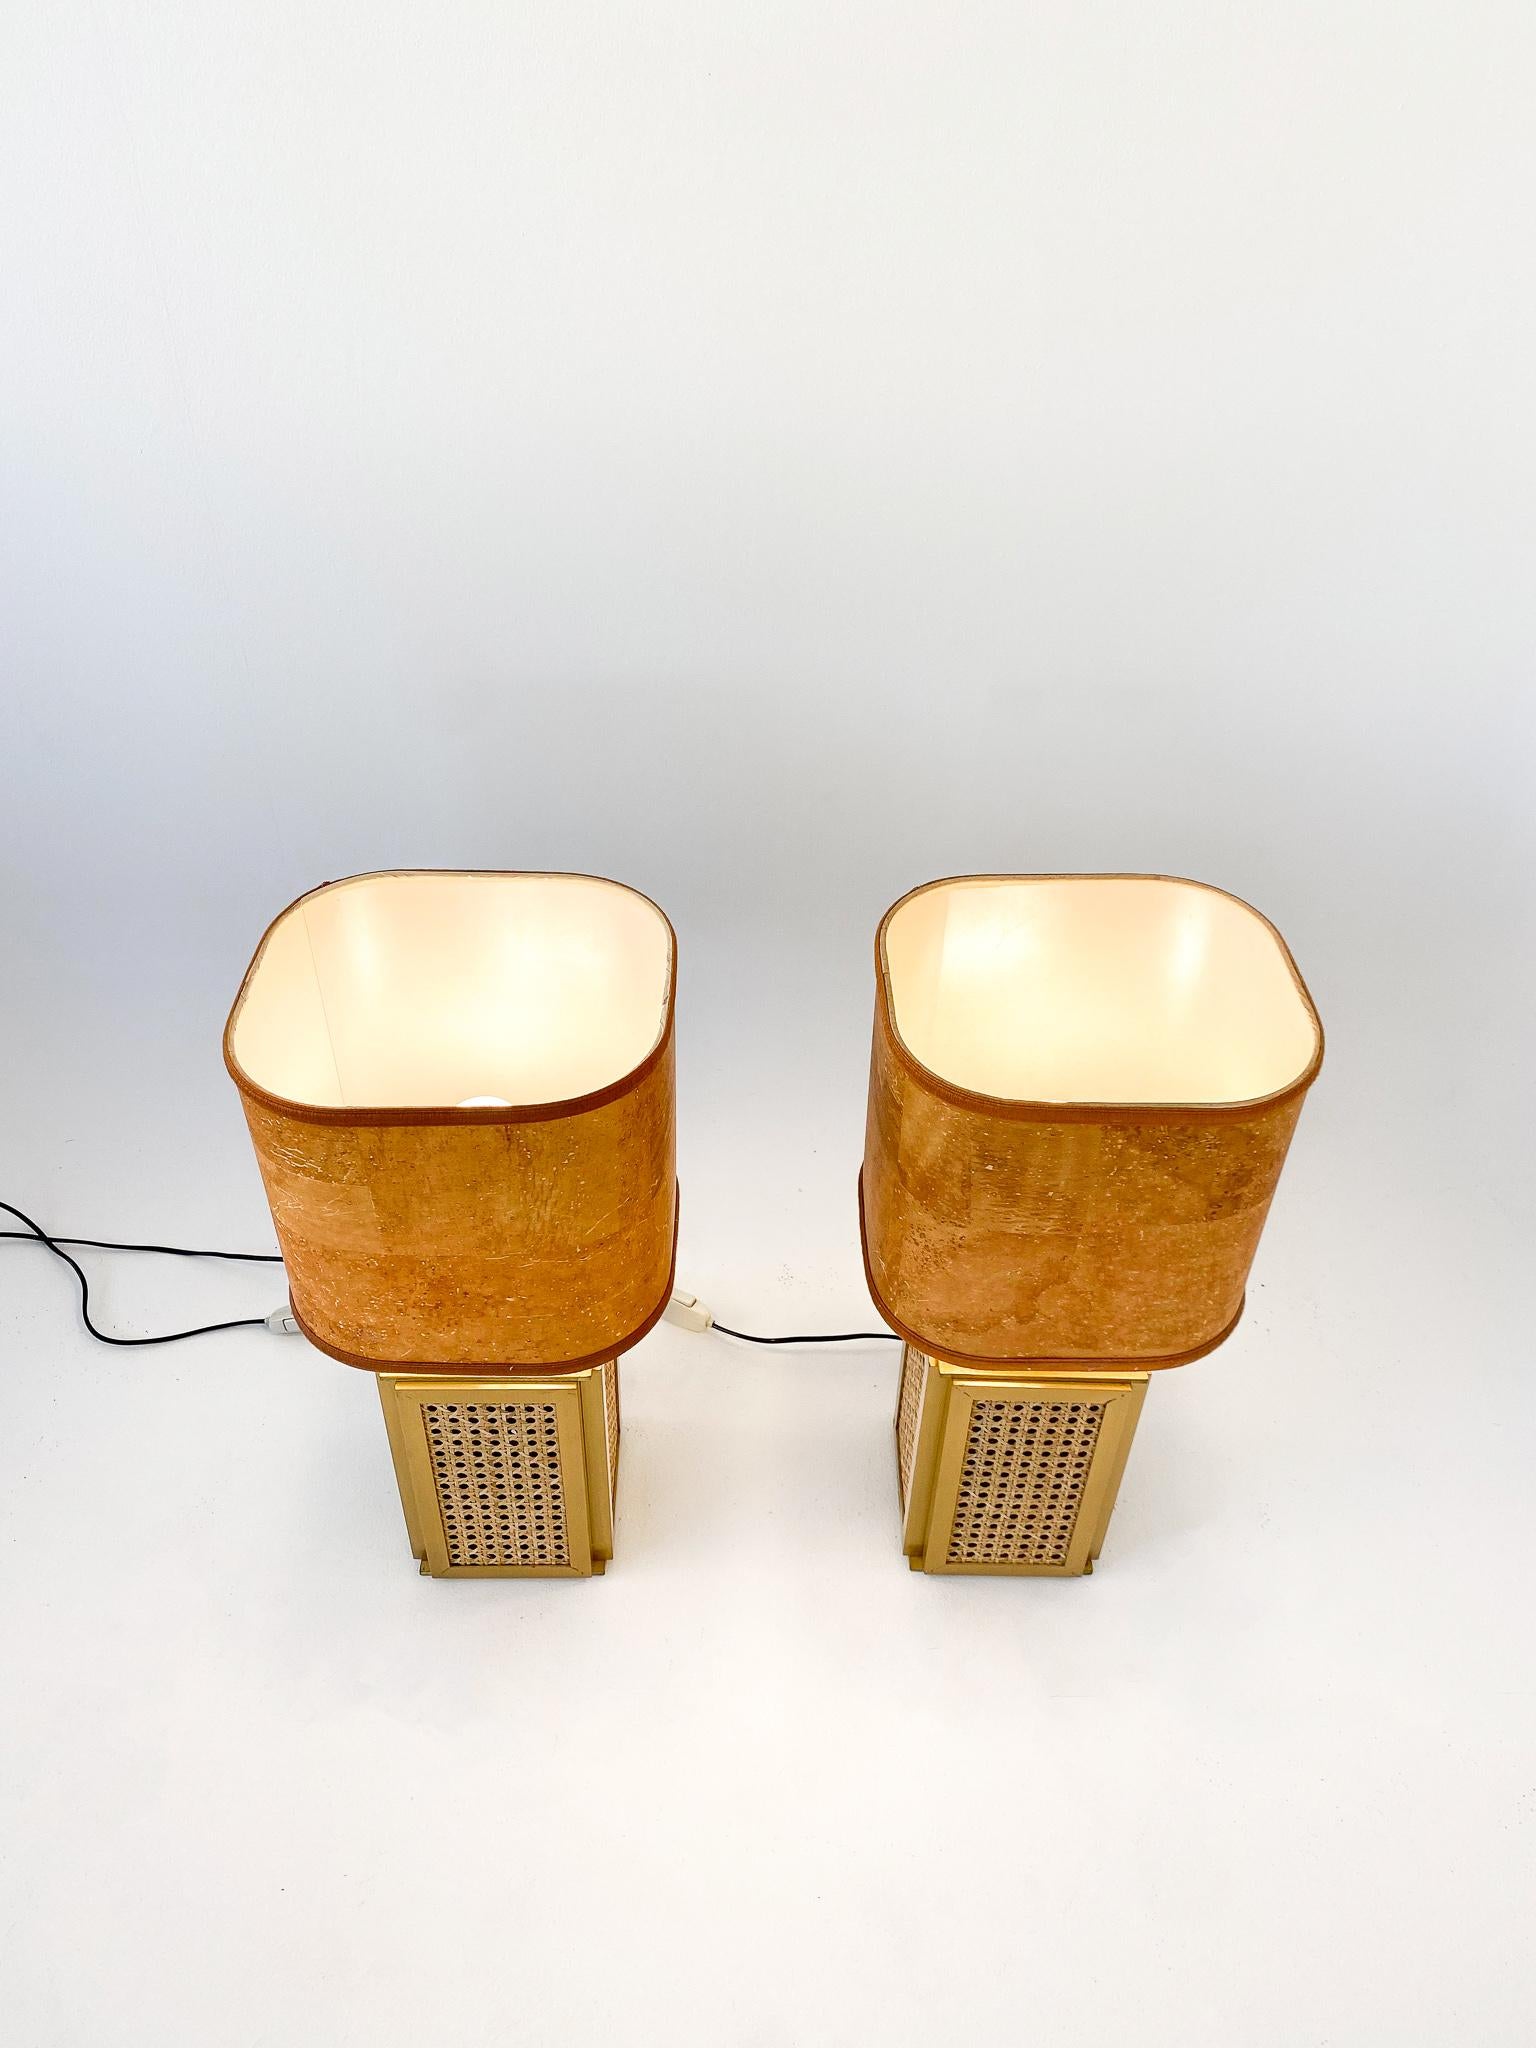 Italian Mid Century Modern Table Lamps Cork Shade, Brass and Cane Base, Italy, 1970s For Sale